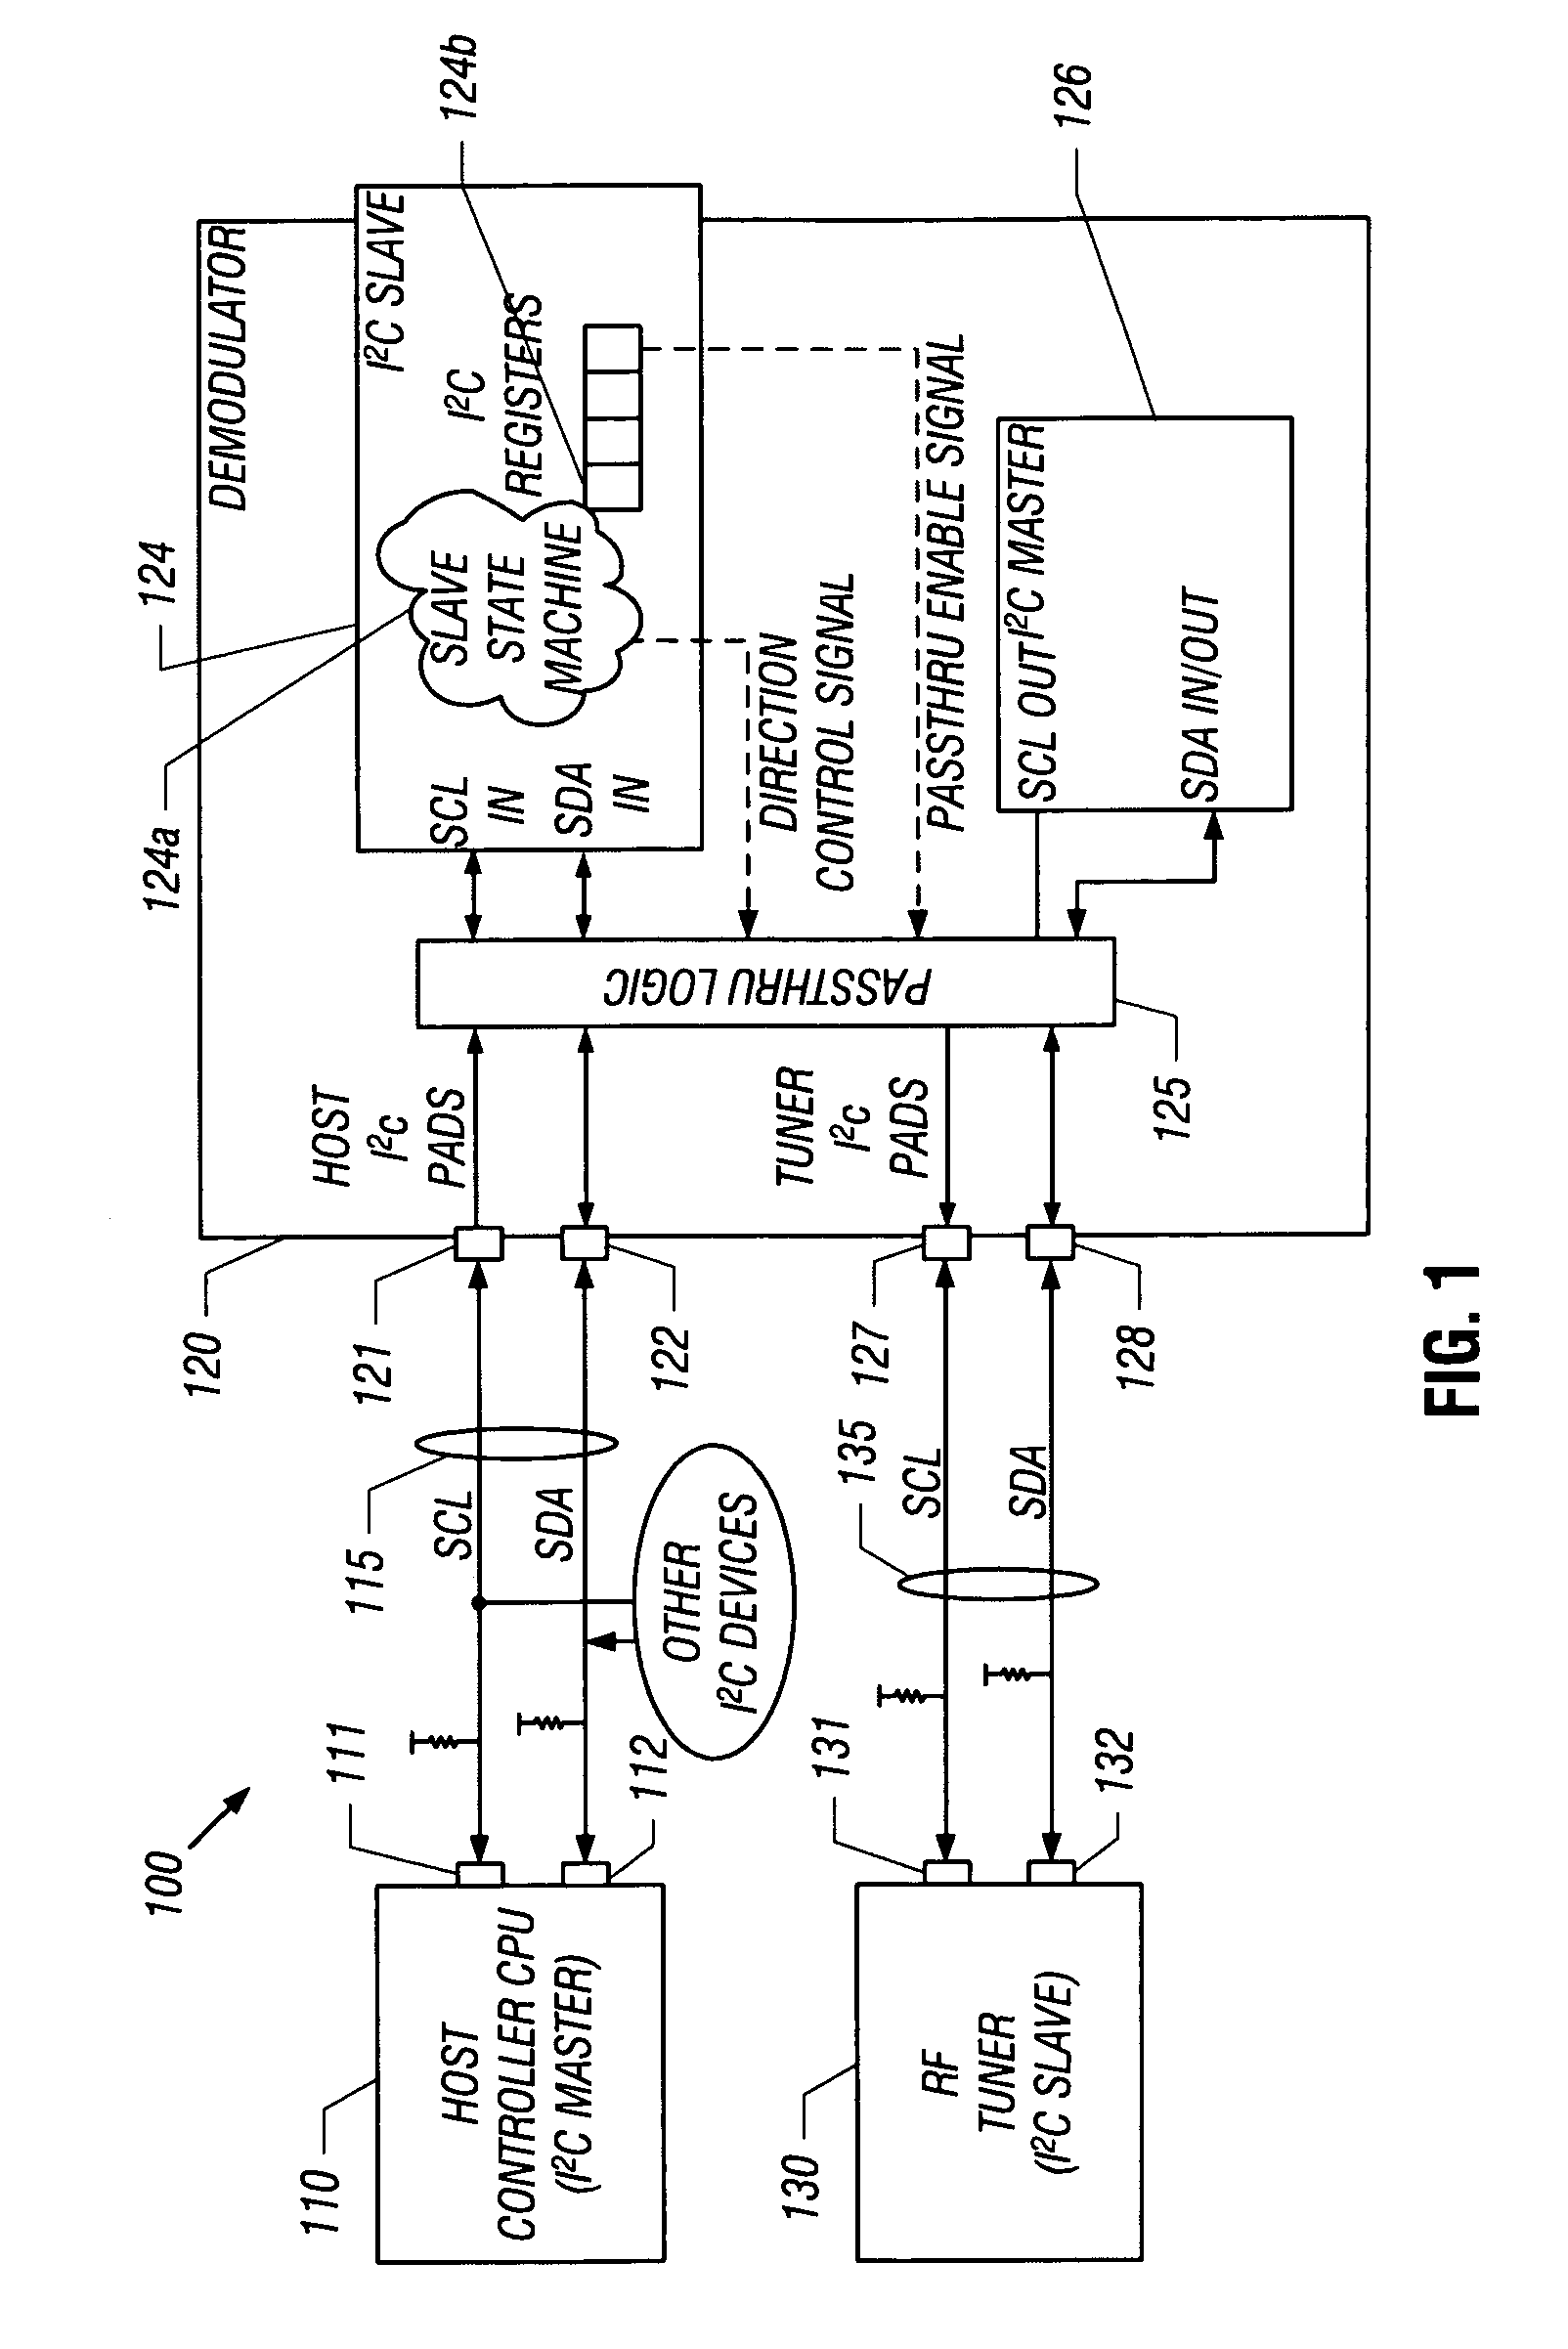 Controlling passthrough of communications between multiple buses